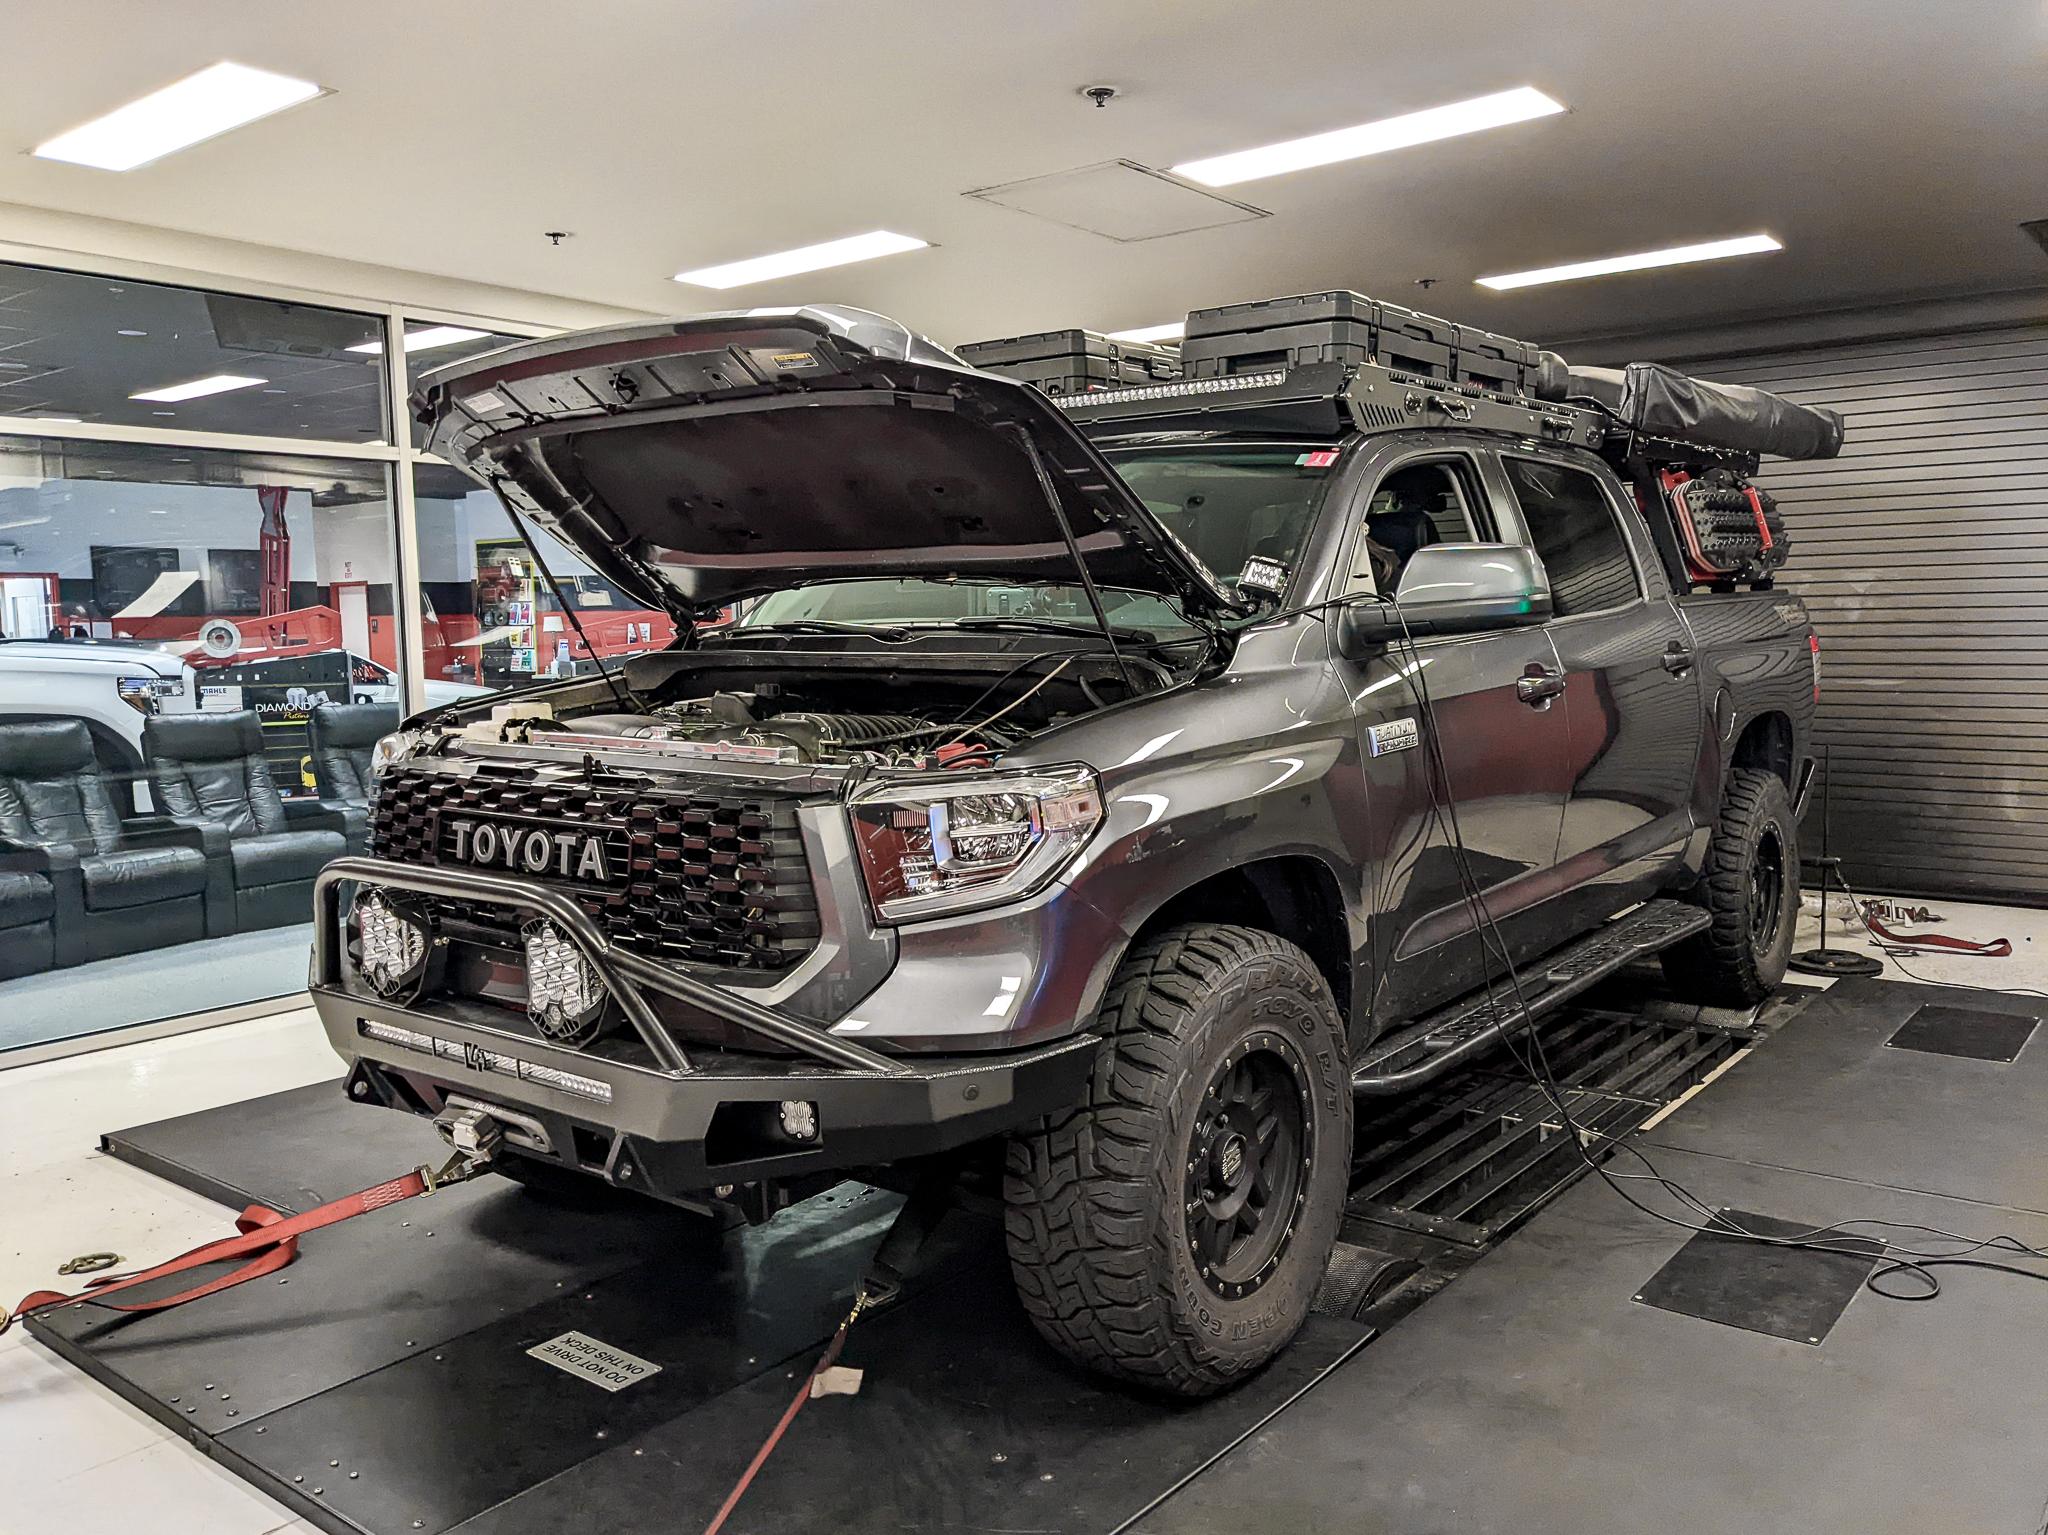 Toyota Tundra Gets Harrop Supercharger Installed Tuned